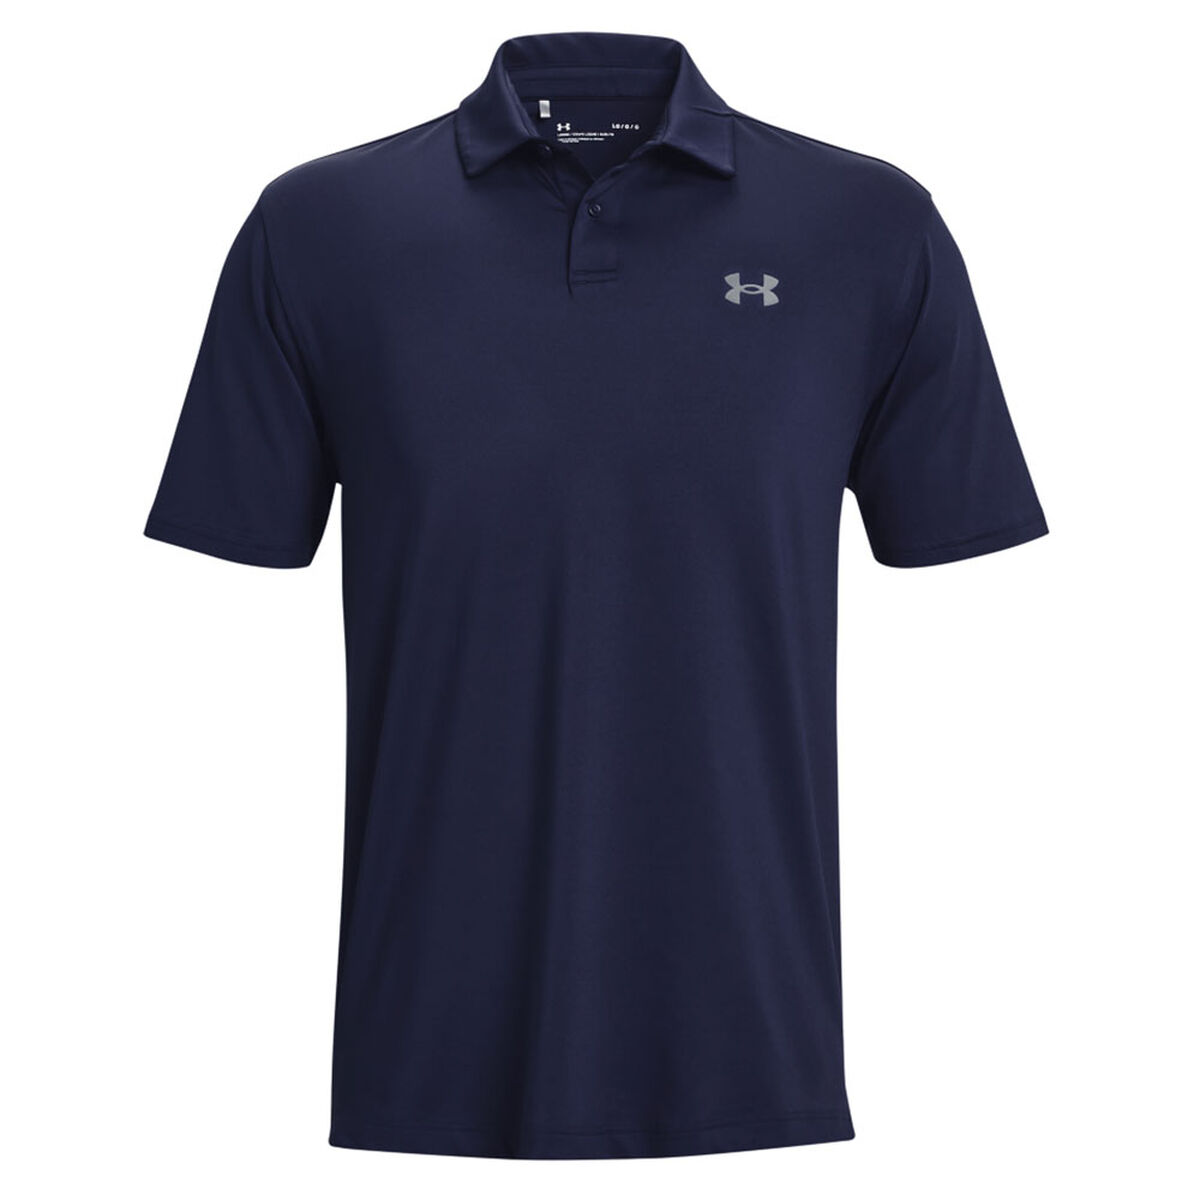 Under Armour Men's Navy Blue and Grey T2G Golf Polo Shirt, Size: L | American Golf von Under Armour